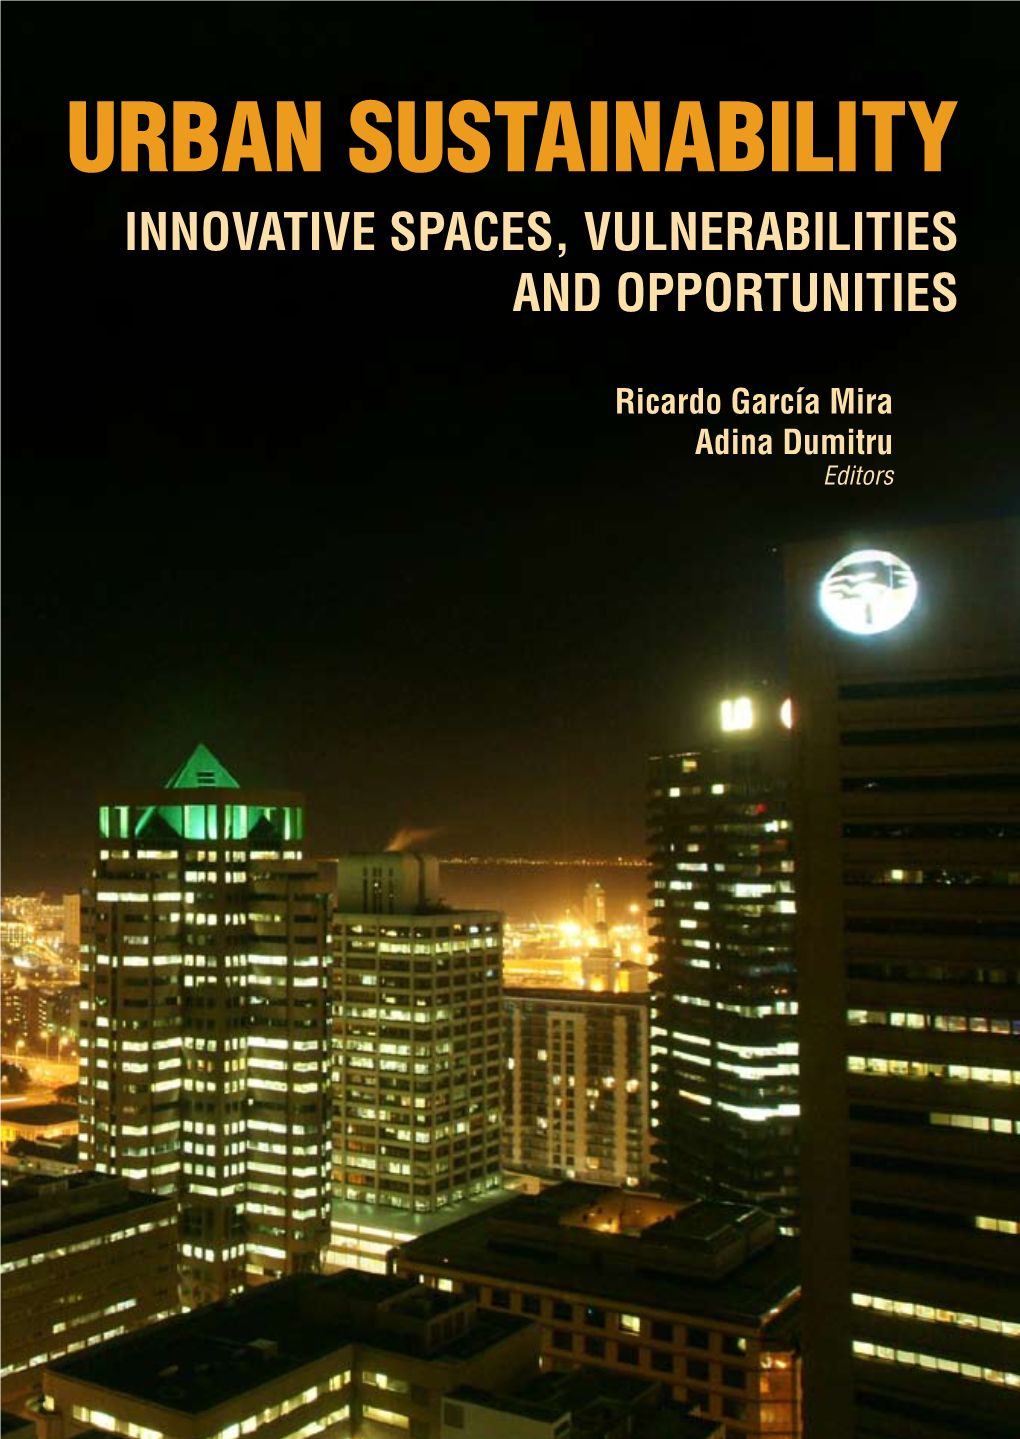 Urban Sustainability Innovative Spaces, Vulnerabilities and Opportunities